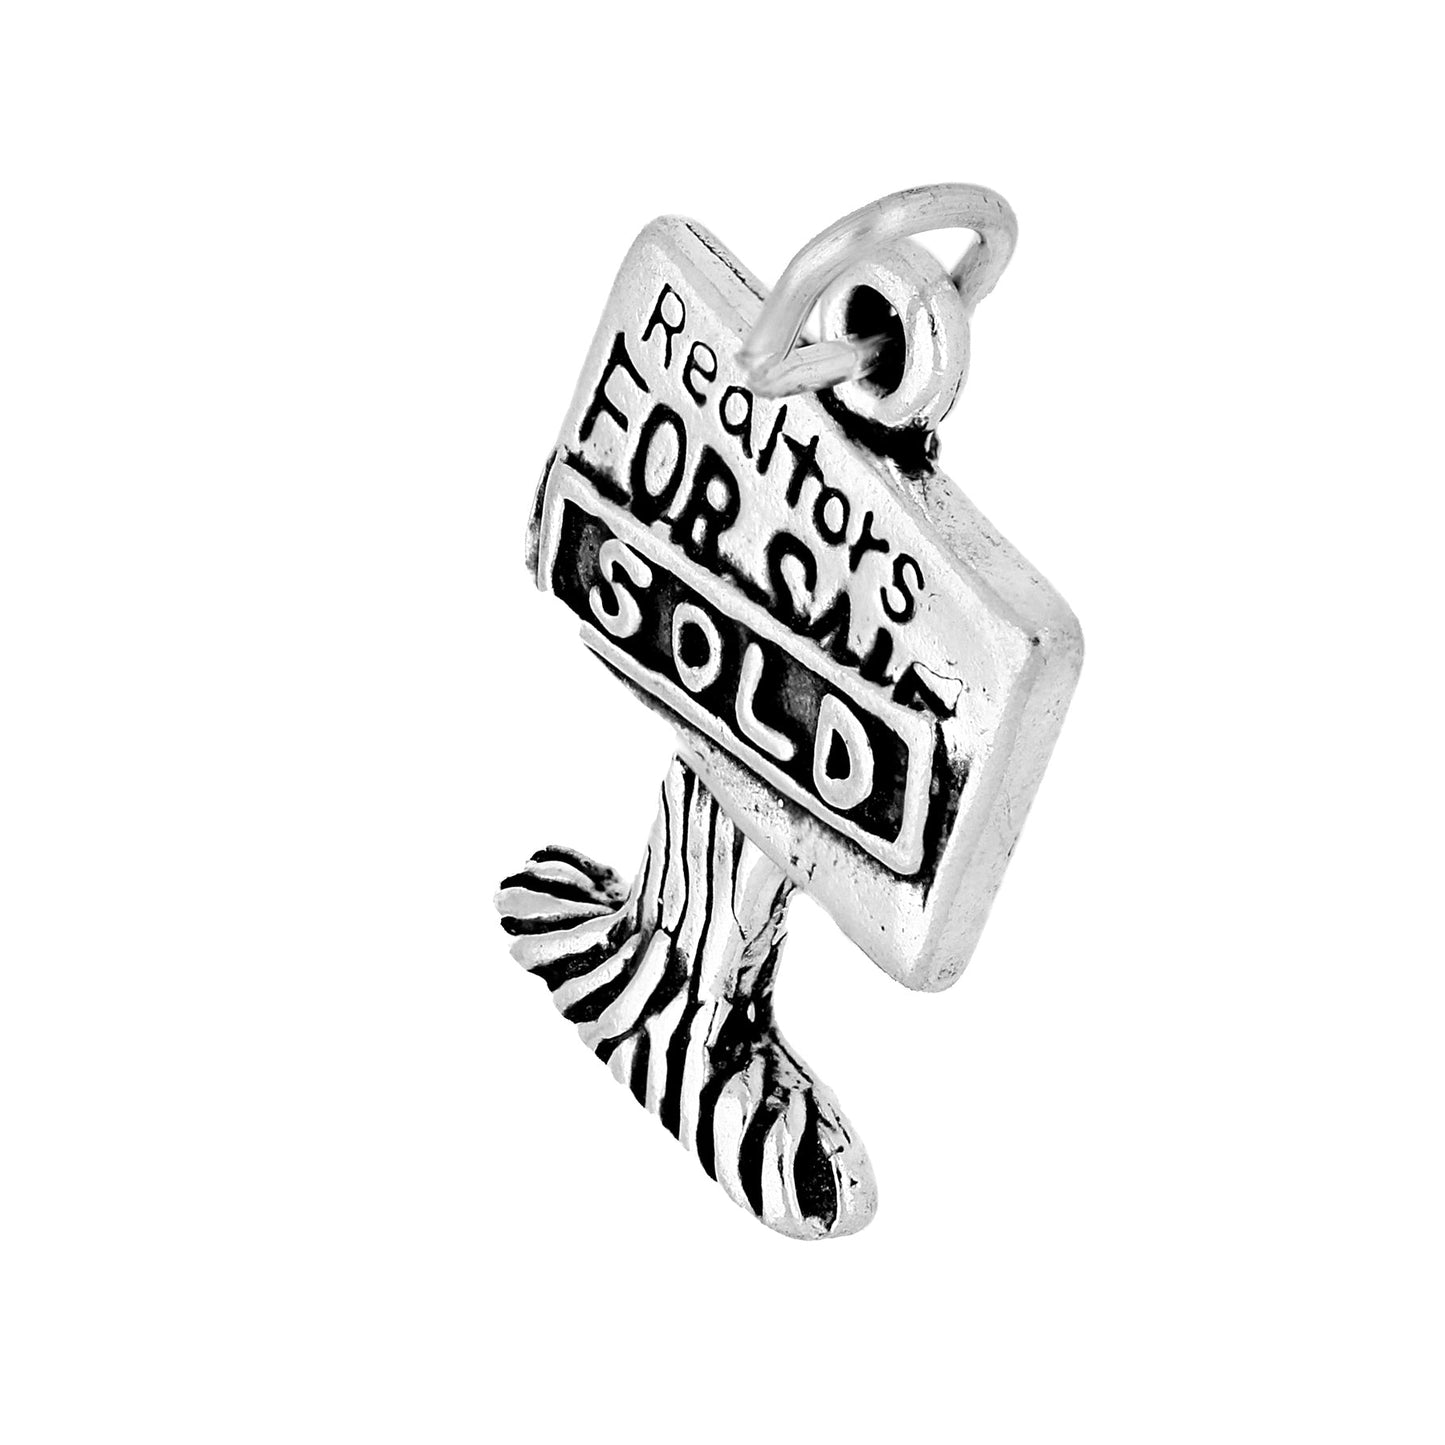 Sterling Silver House Sale Sign Charm